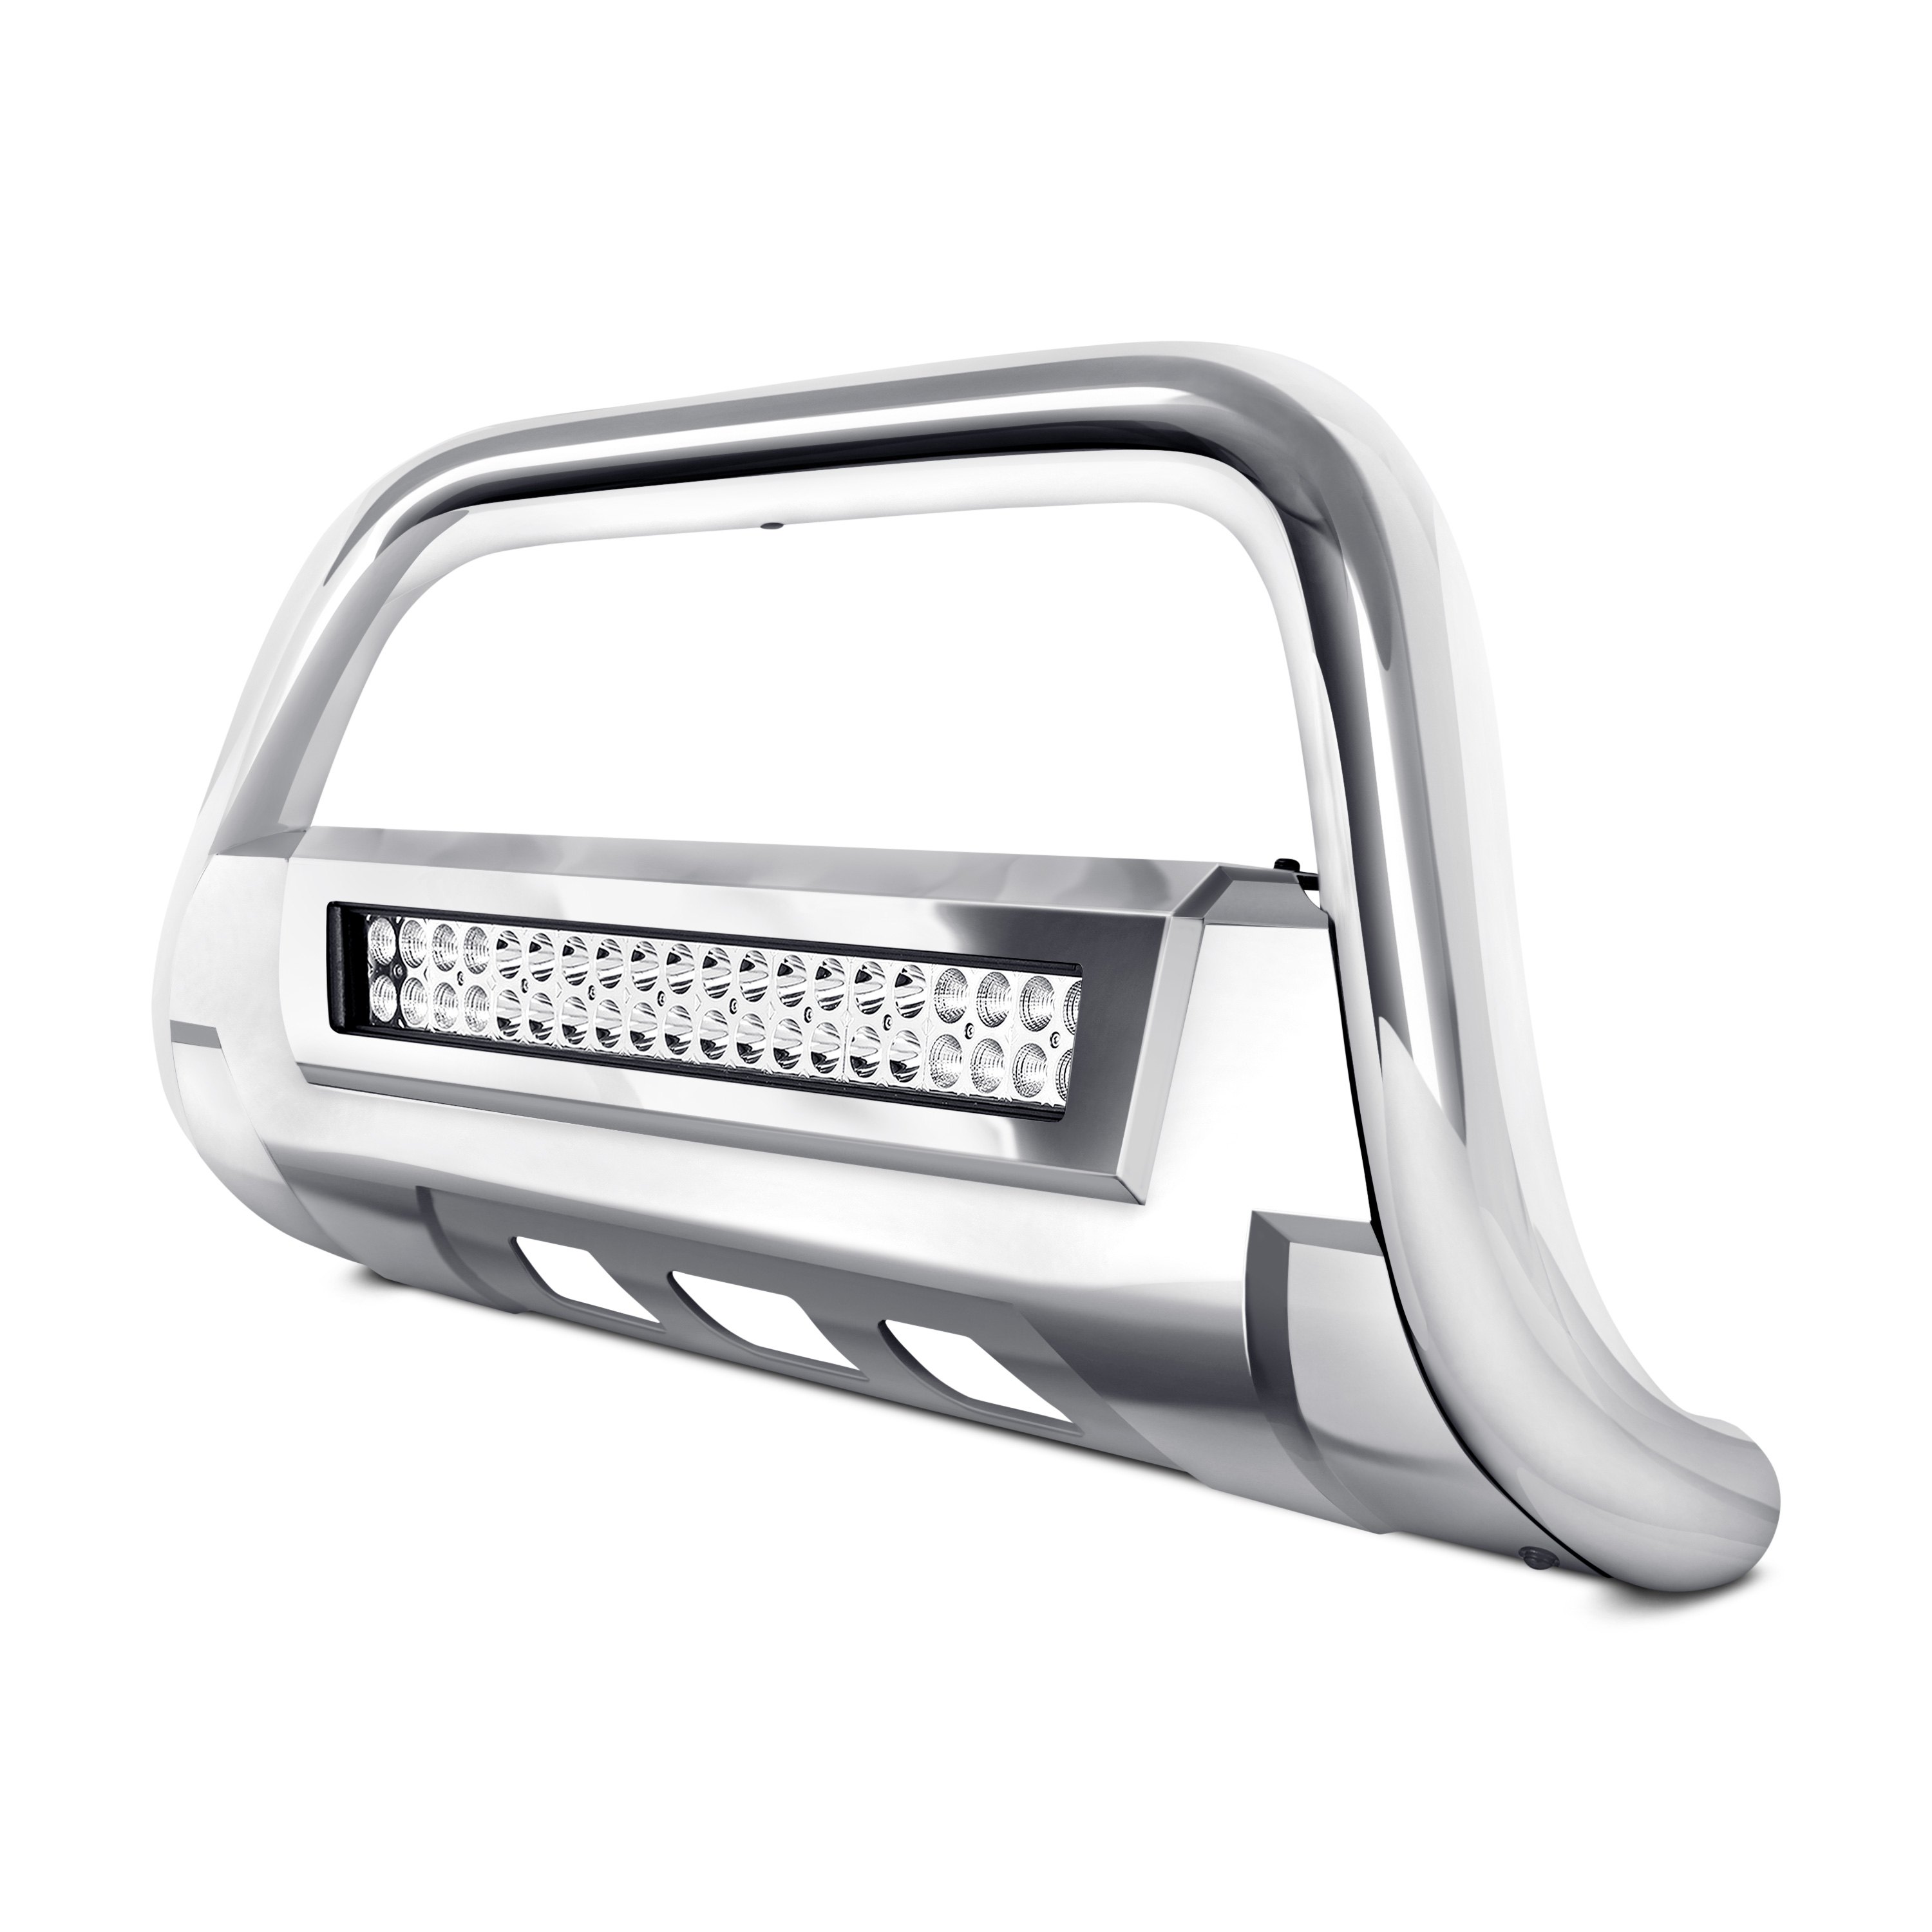 Torxe™ - Ram 1500 2014 3.5" X2 Series Oval Bull Bar with LED Light Bar and Skid Plate 2014 Ram 1500 Grill With Light Bar